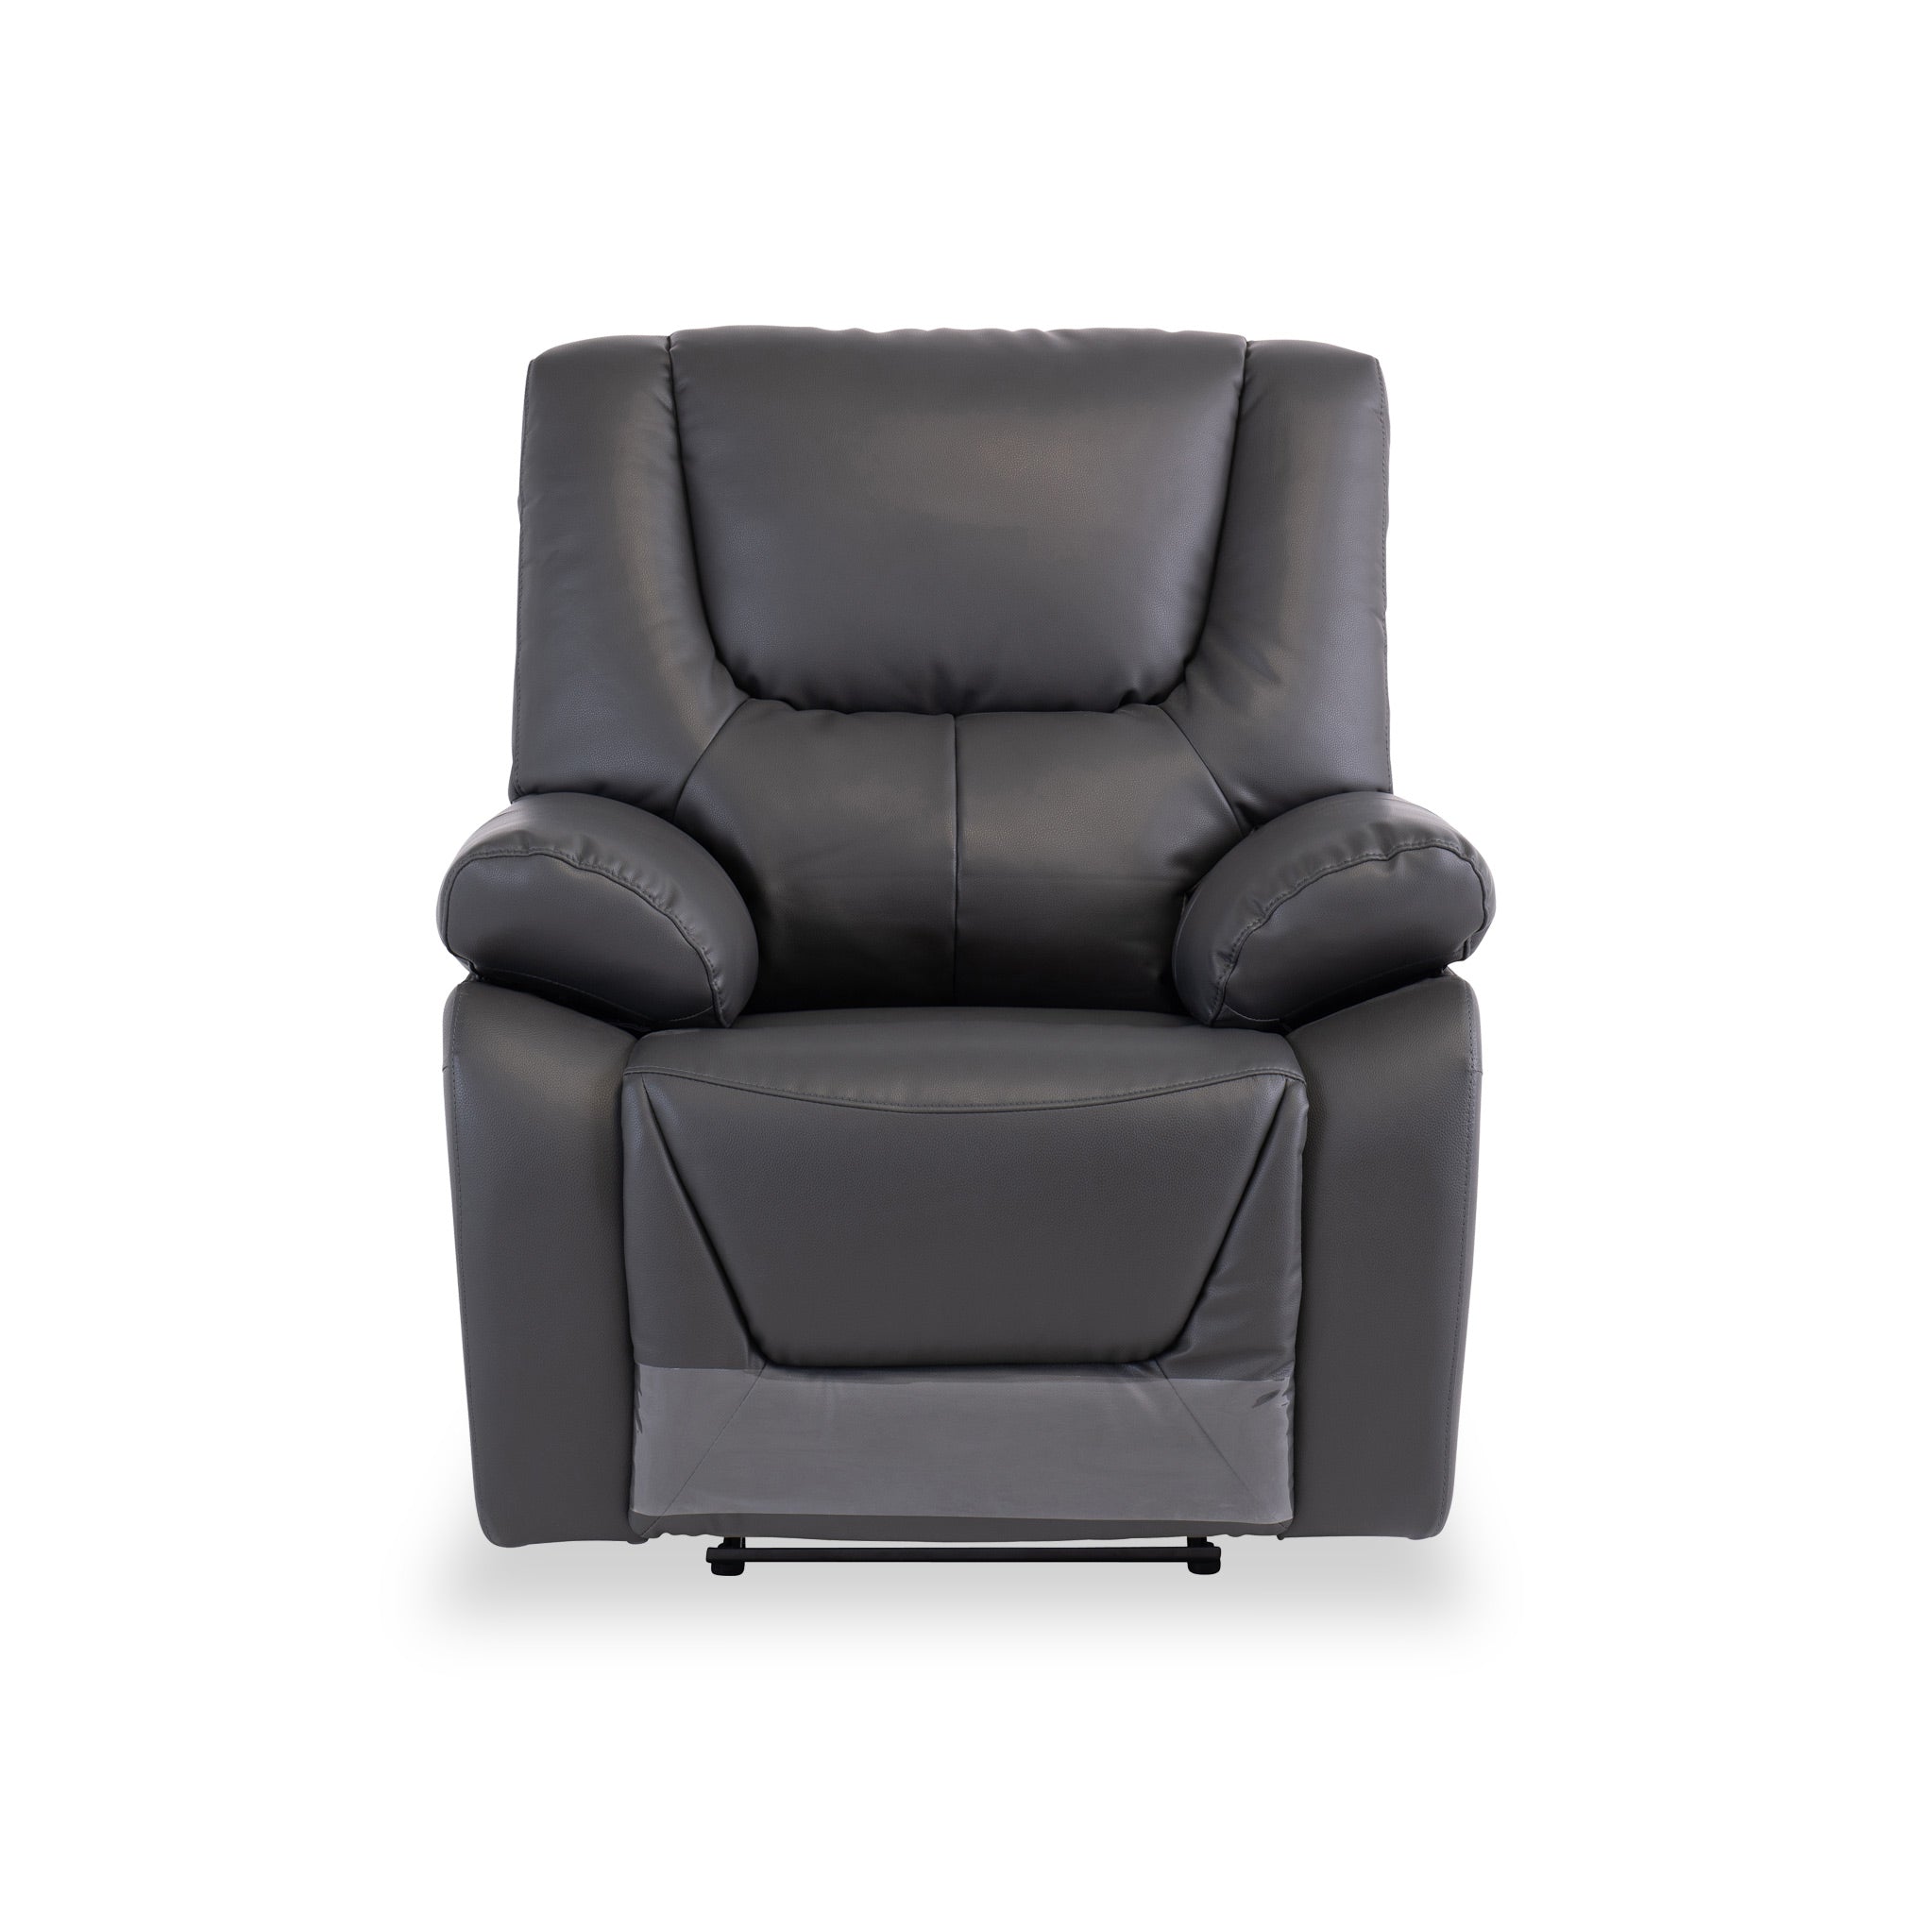 Baxter Leather Electric Reclining Armchair Blue Grey Roseland